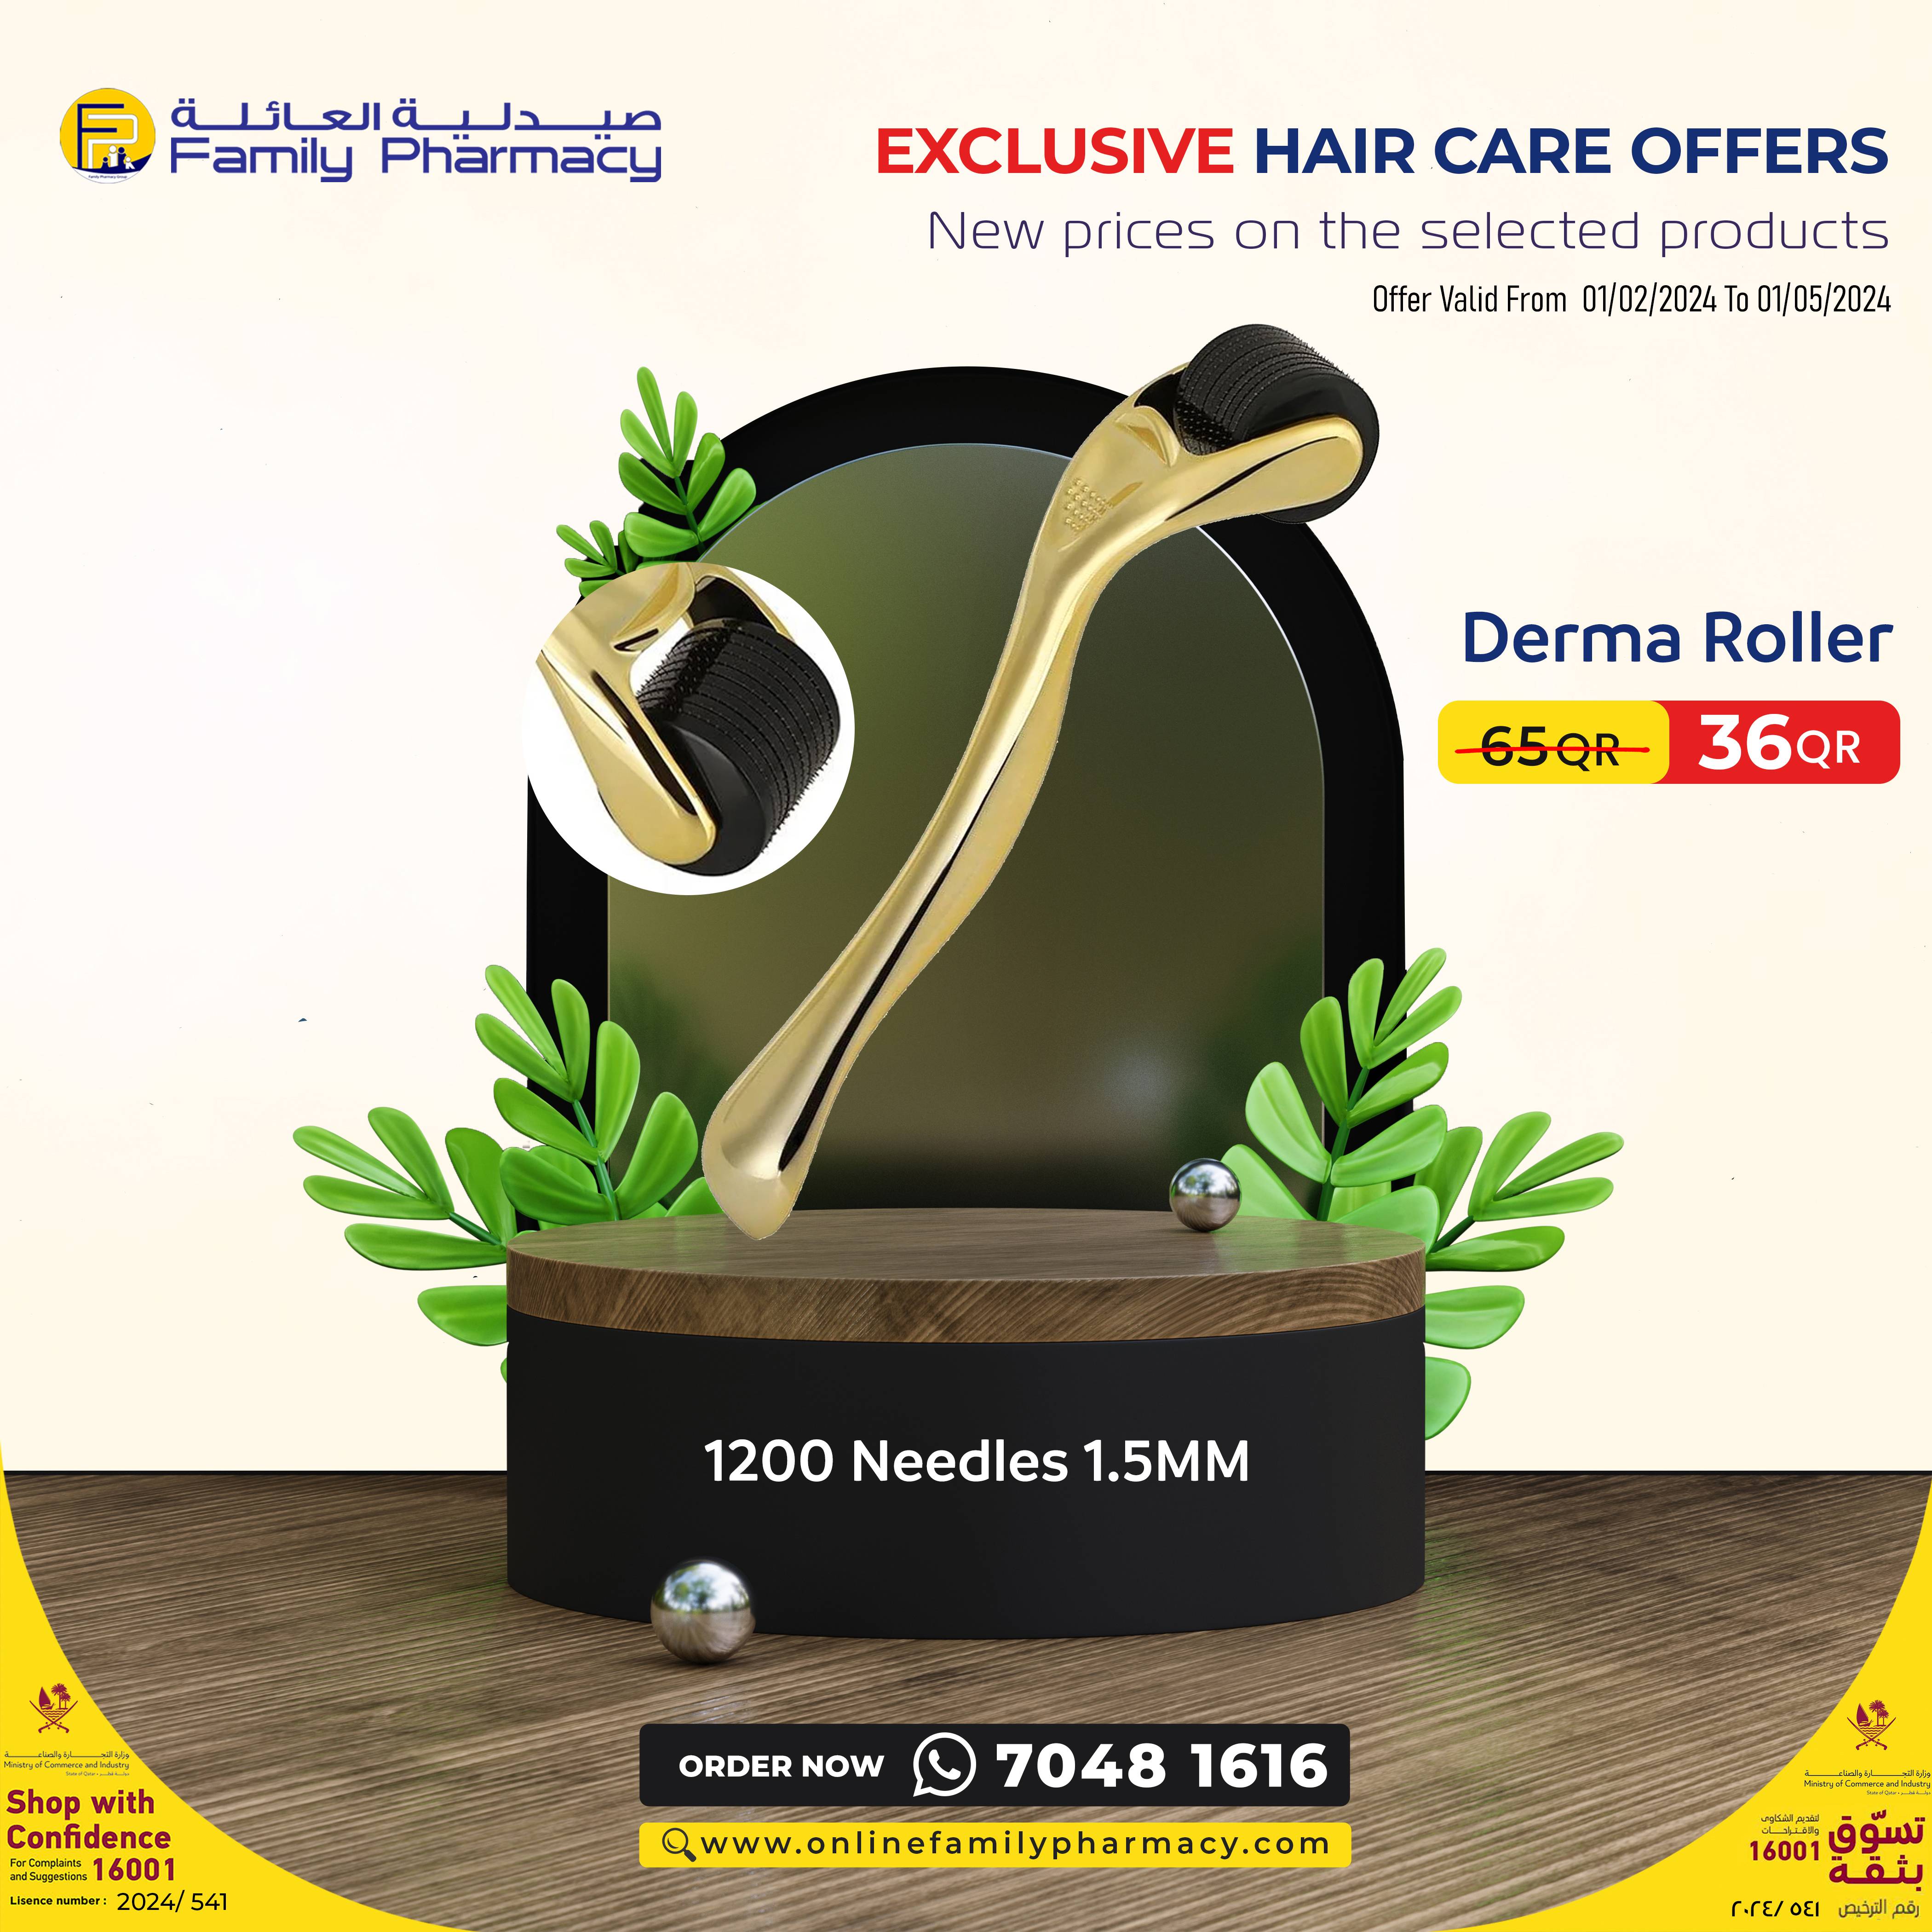 Body Derma Roller-1200 Needles-drs 150(1.5mm) -beijing Metos(offer Available at Online Family Pharmacy Qatar Doha